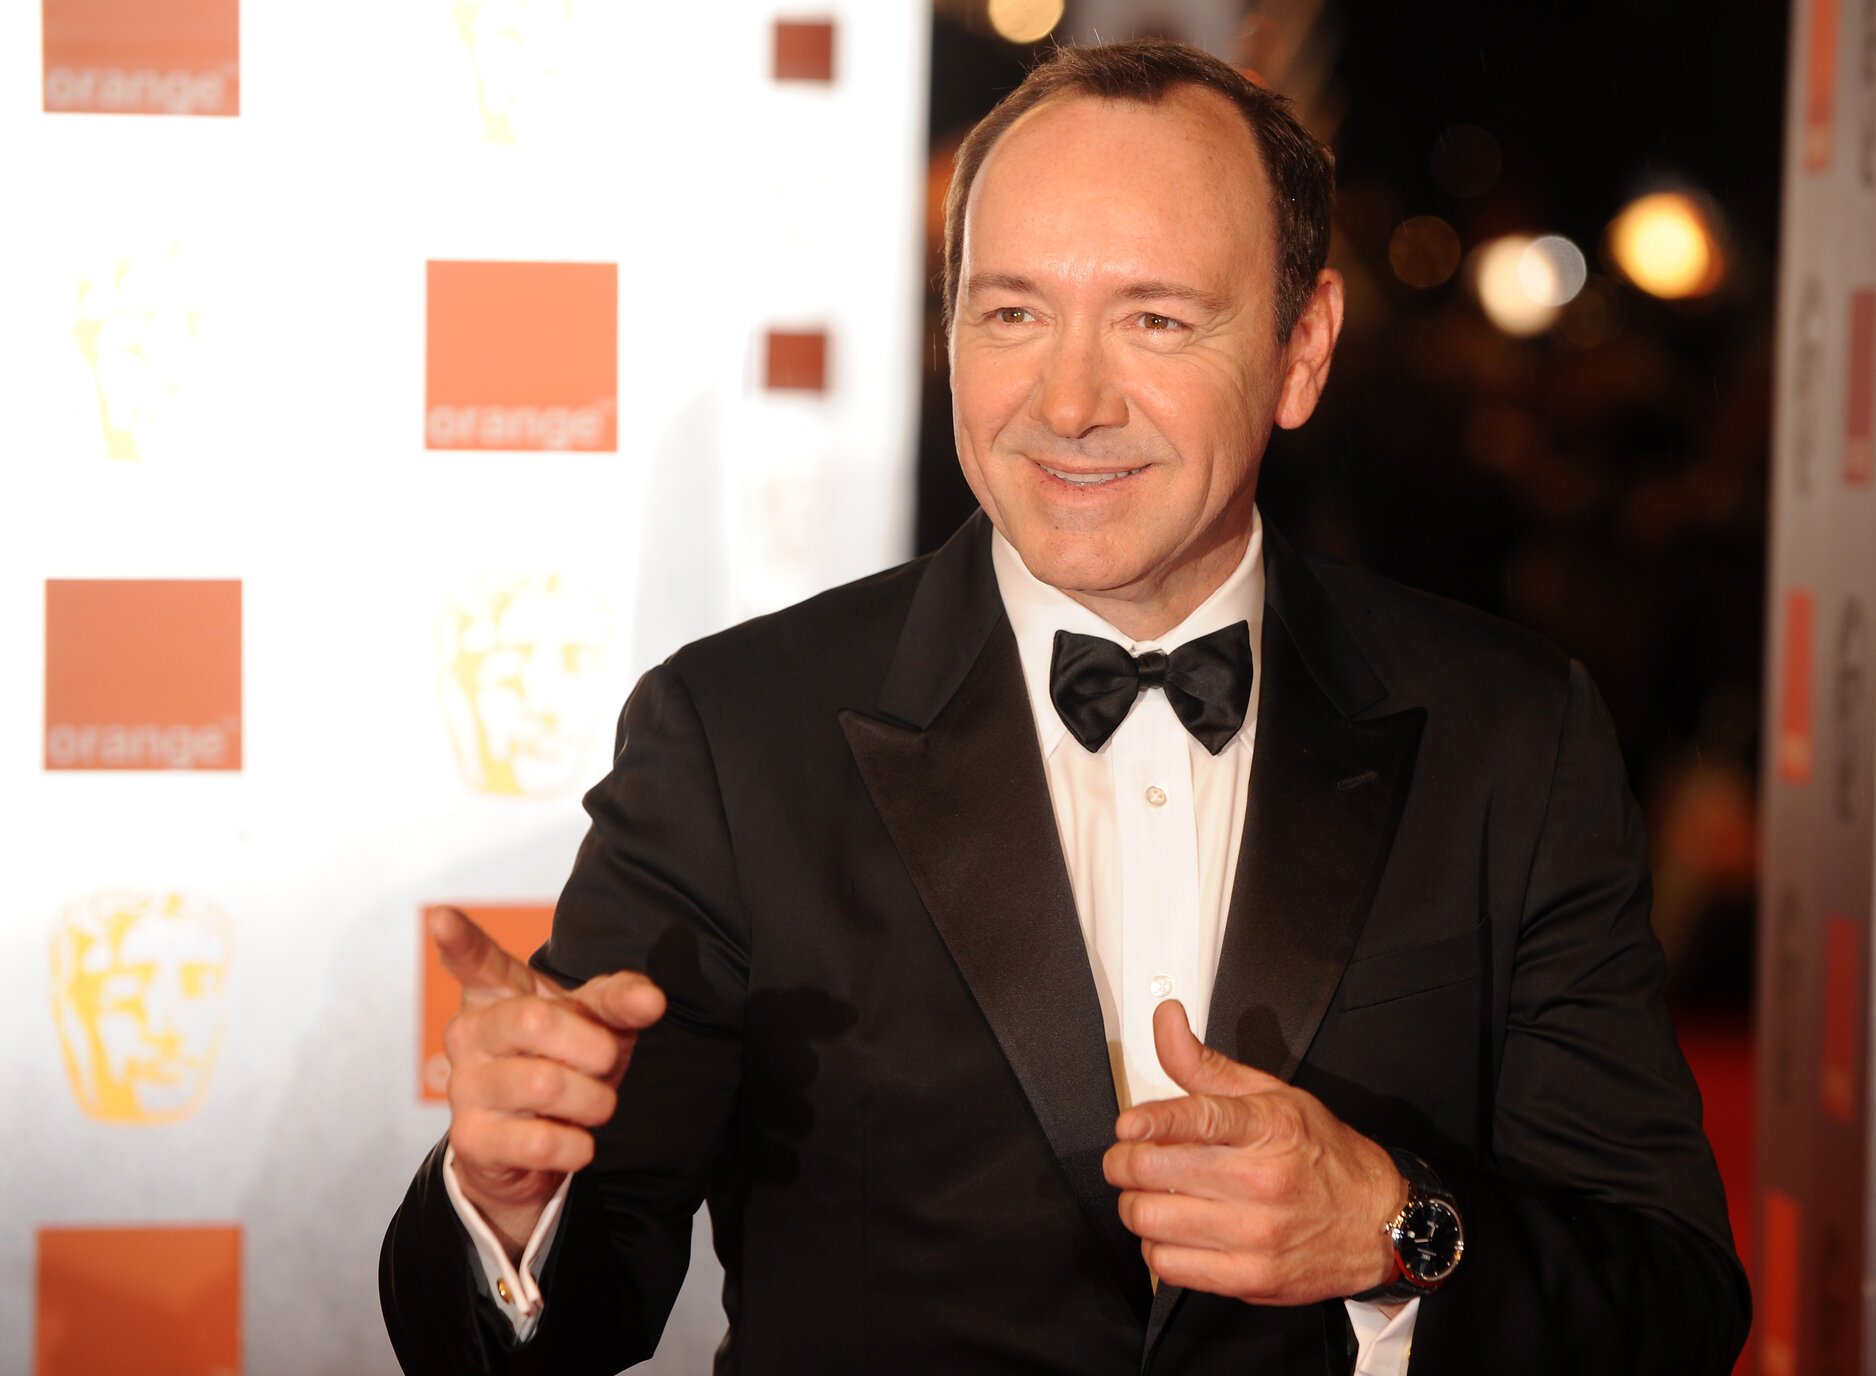 Kevin Spacey poses for photographers as he arrives for the British Academy of Film Awards (BAFTA) at the Royal Opera House in central London